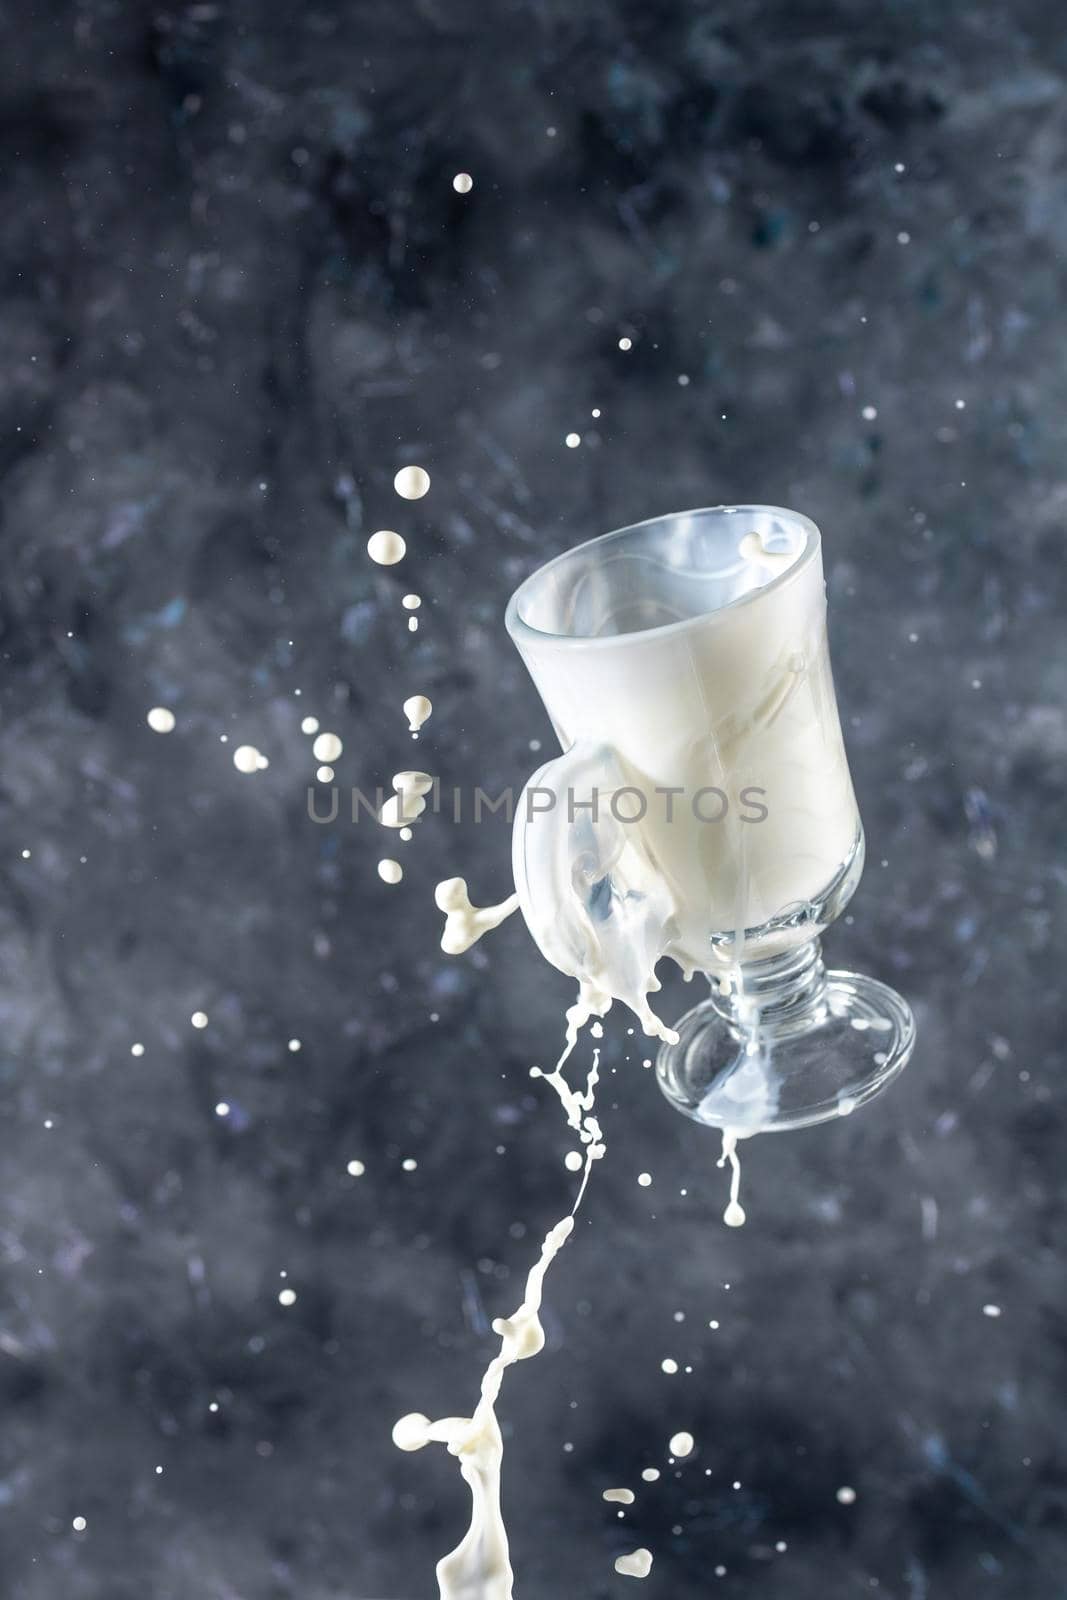 Splash of milk from the glass on a gray background. levitation.